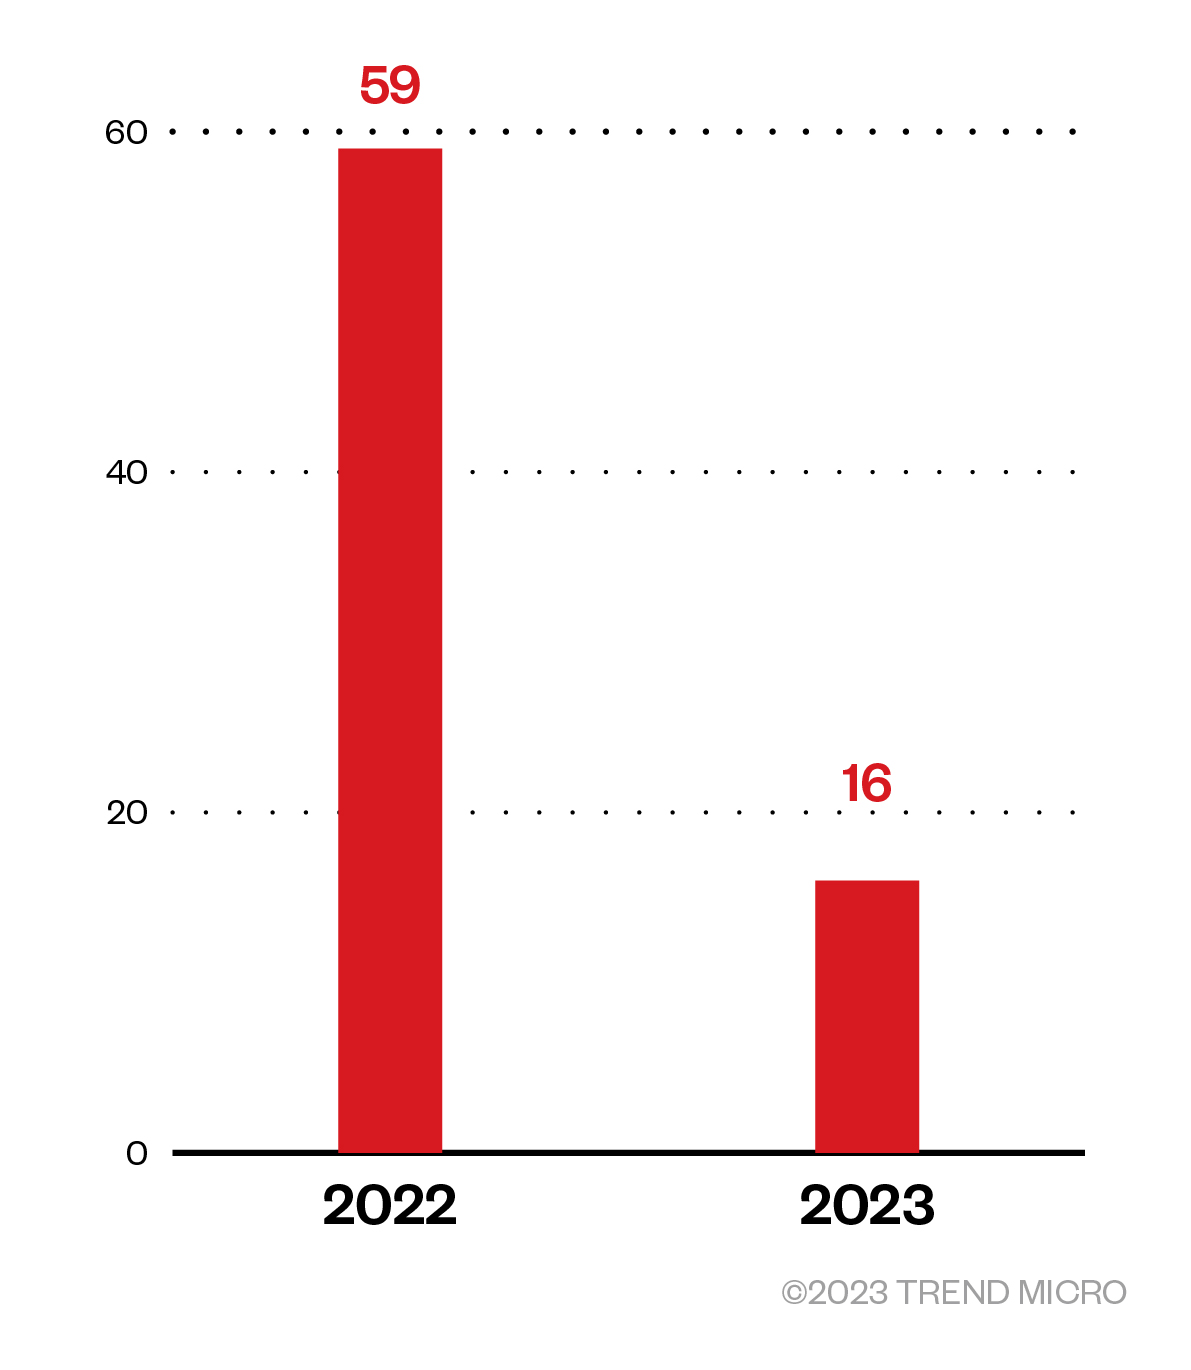 Figure 2. The number of signed drivers in 2022 and 2023 using Microsoft portal